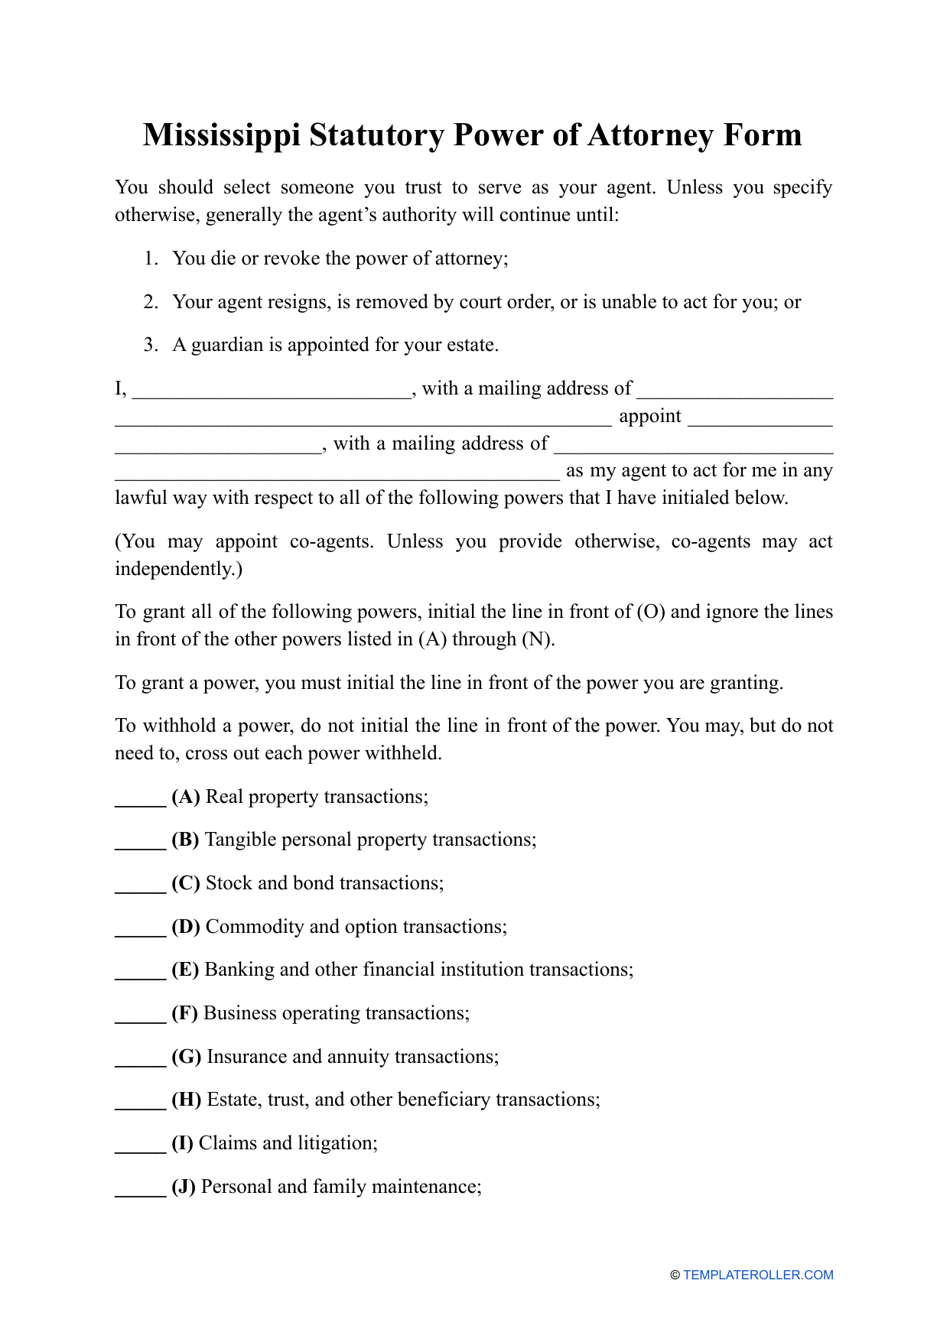 Statutory Power of Attorney Form - Mississippi, Page 1